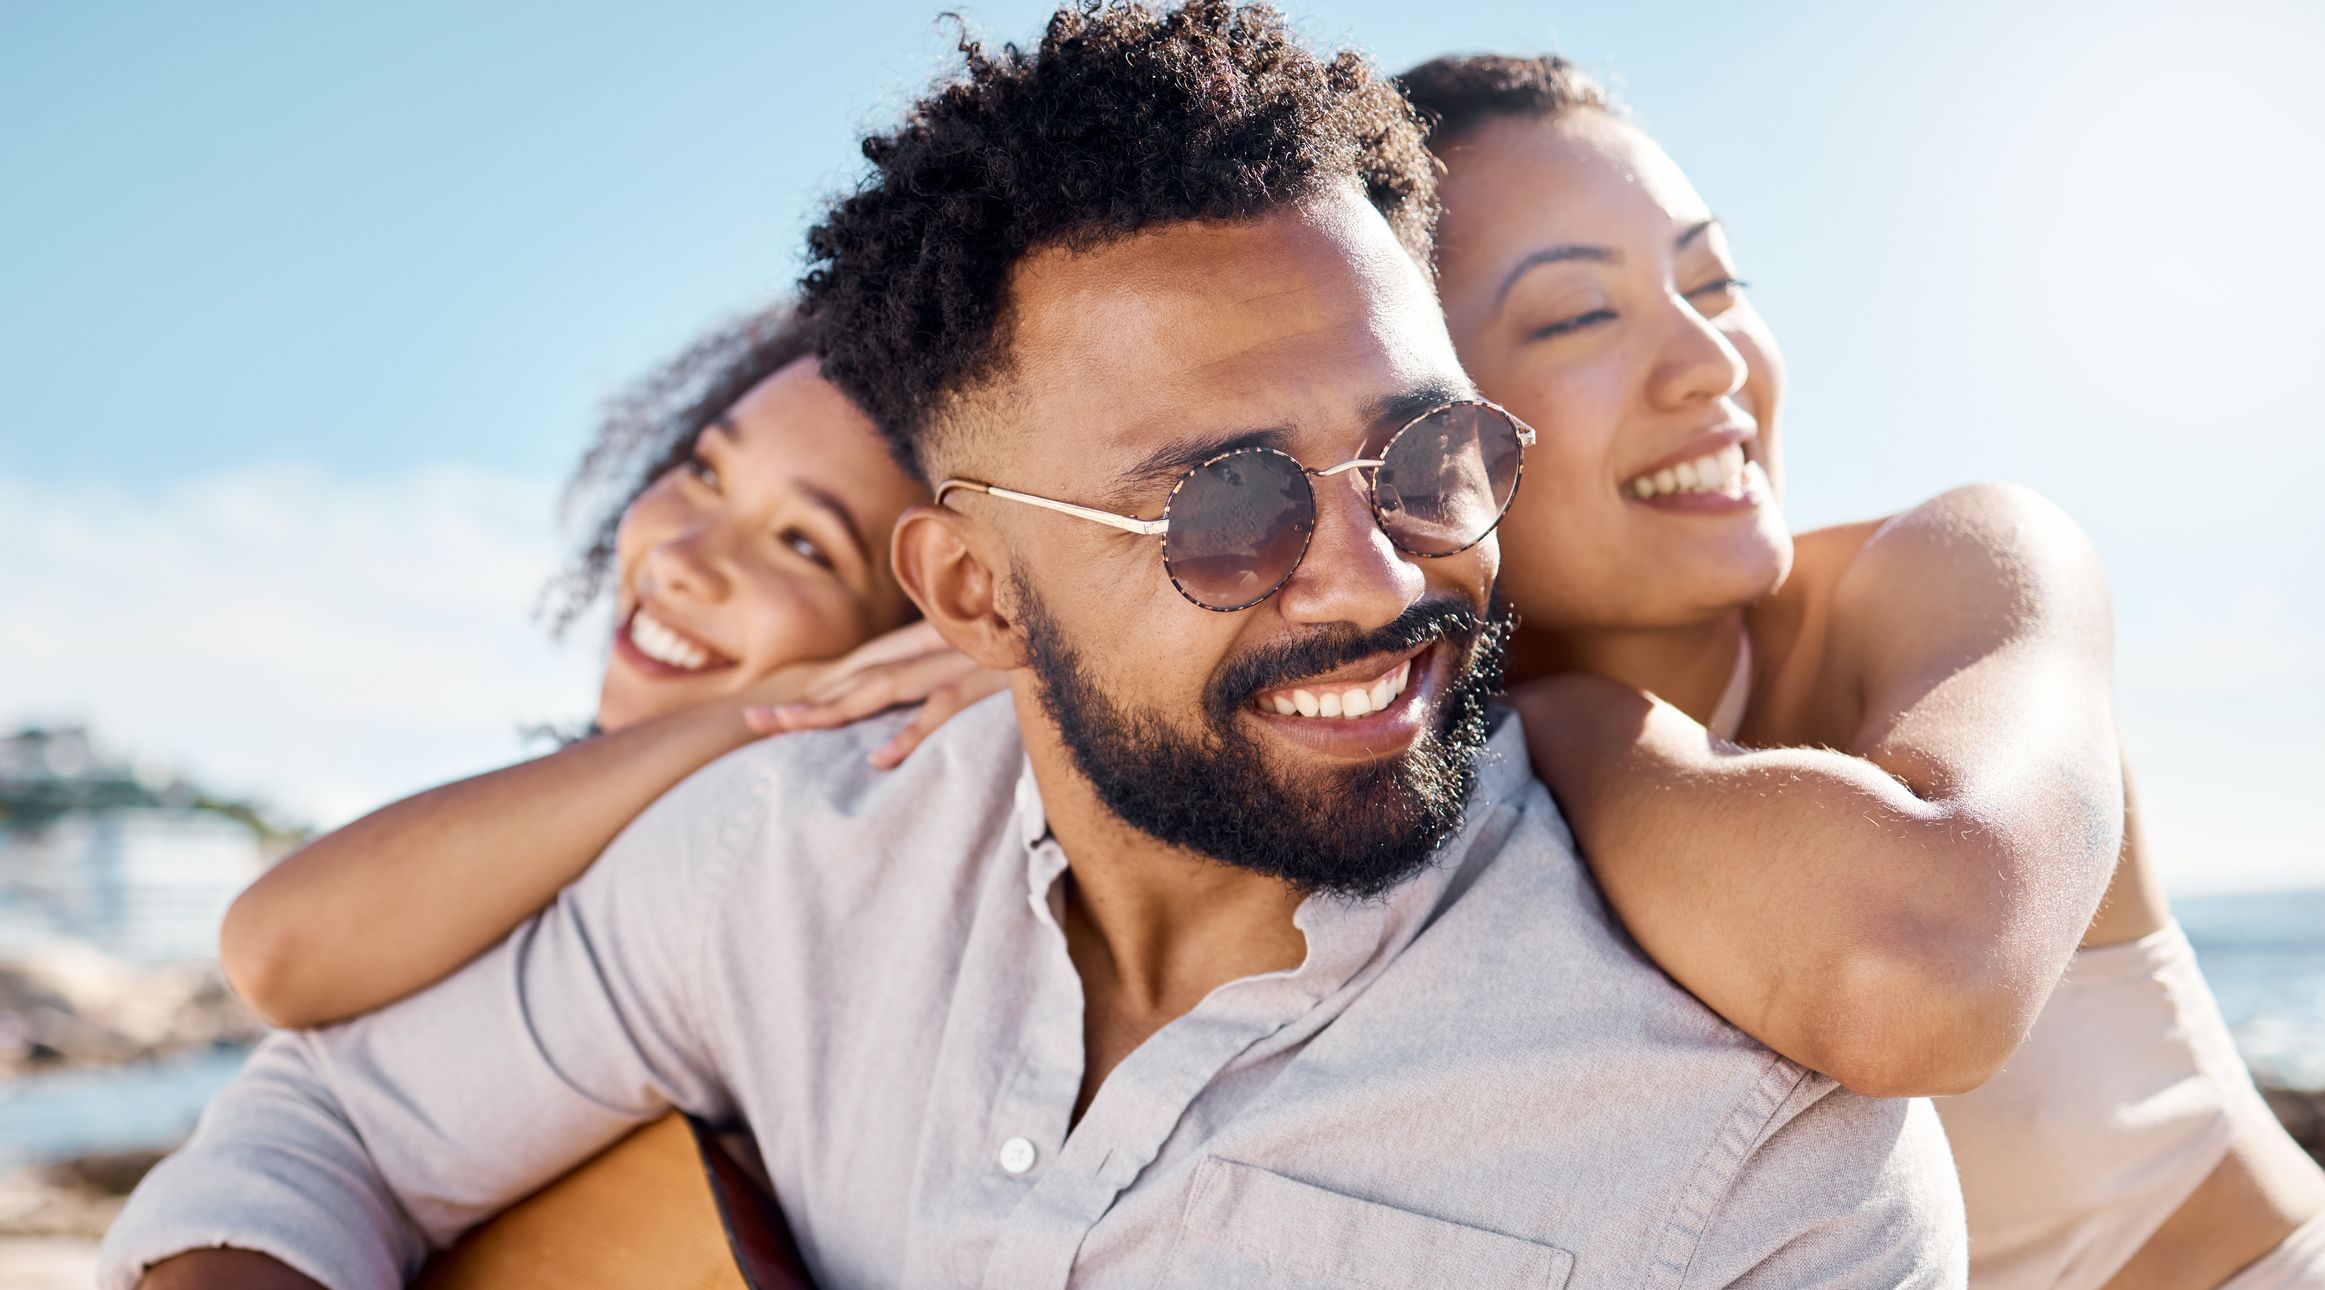 What Is a Throuple? Experts Explain How 3-Way Relationships Work.